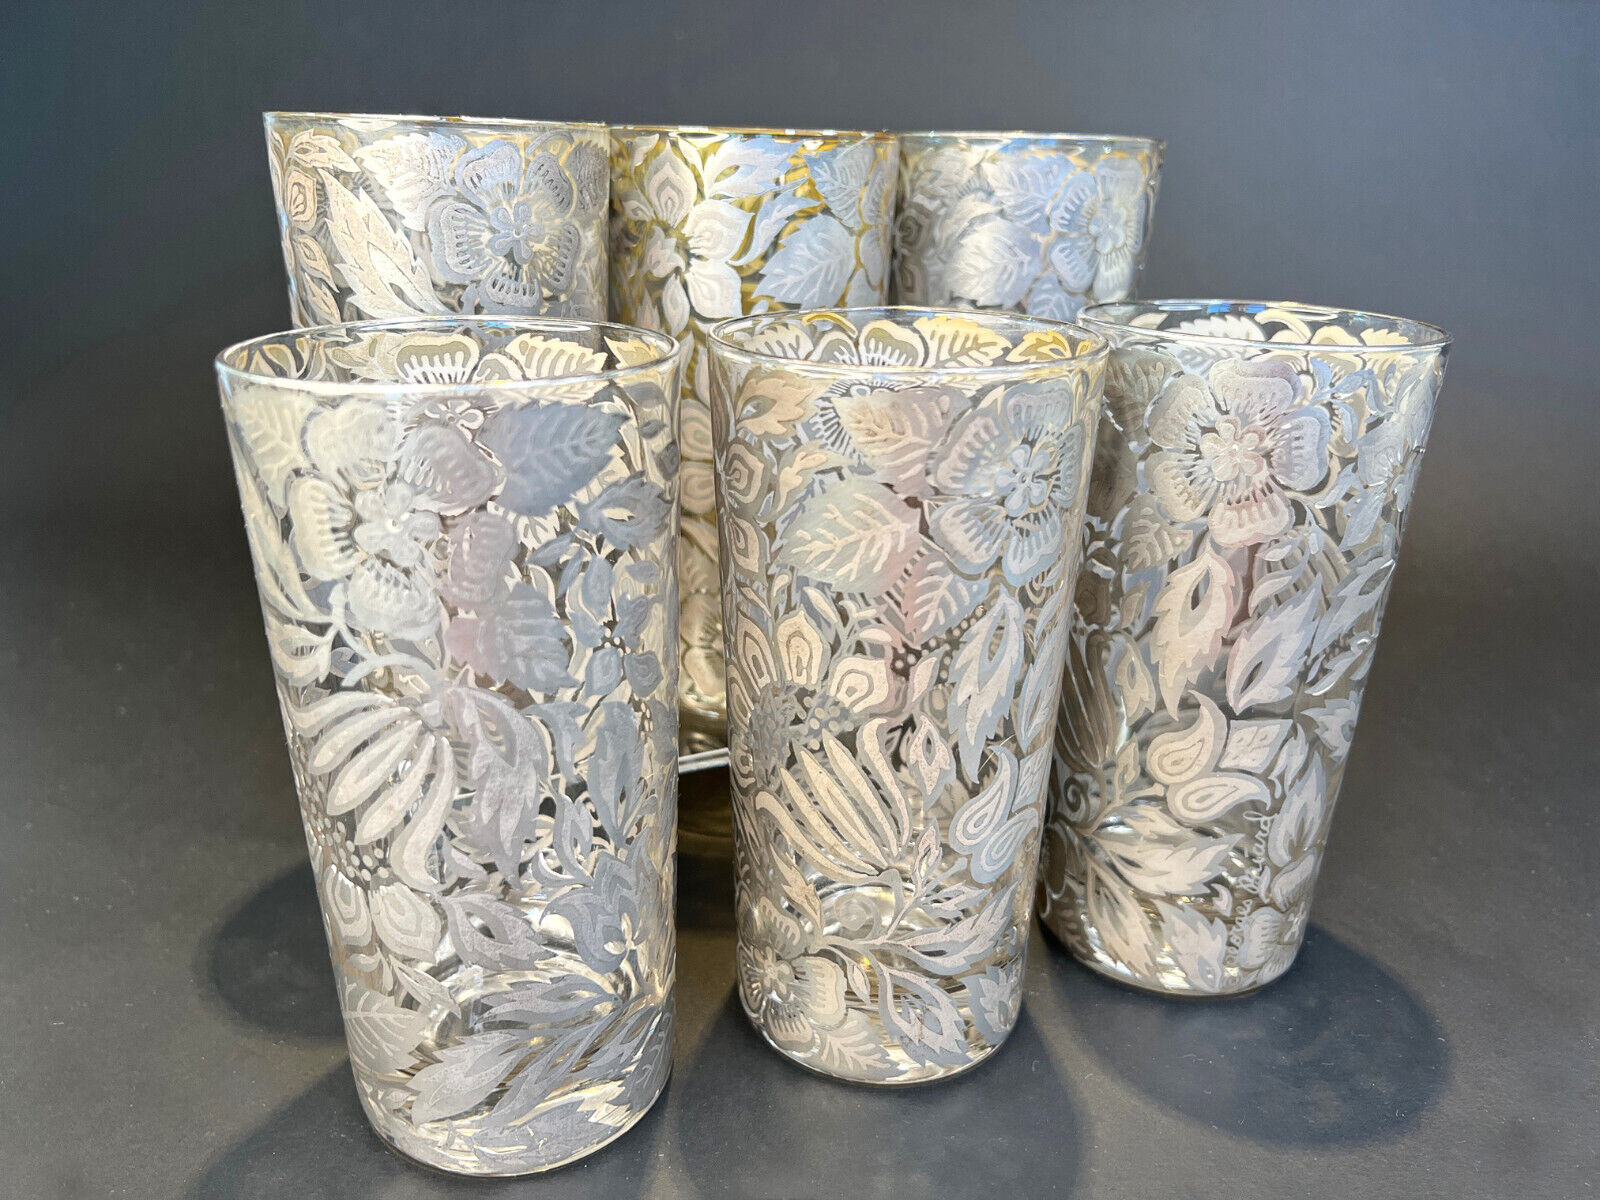 Set of 6 Vintage Georges Briard Silver Gold Floral Highball Tumblers Glasses